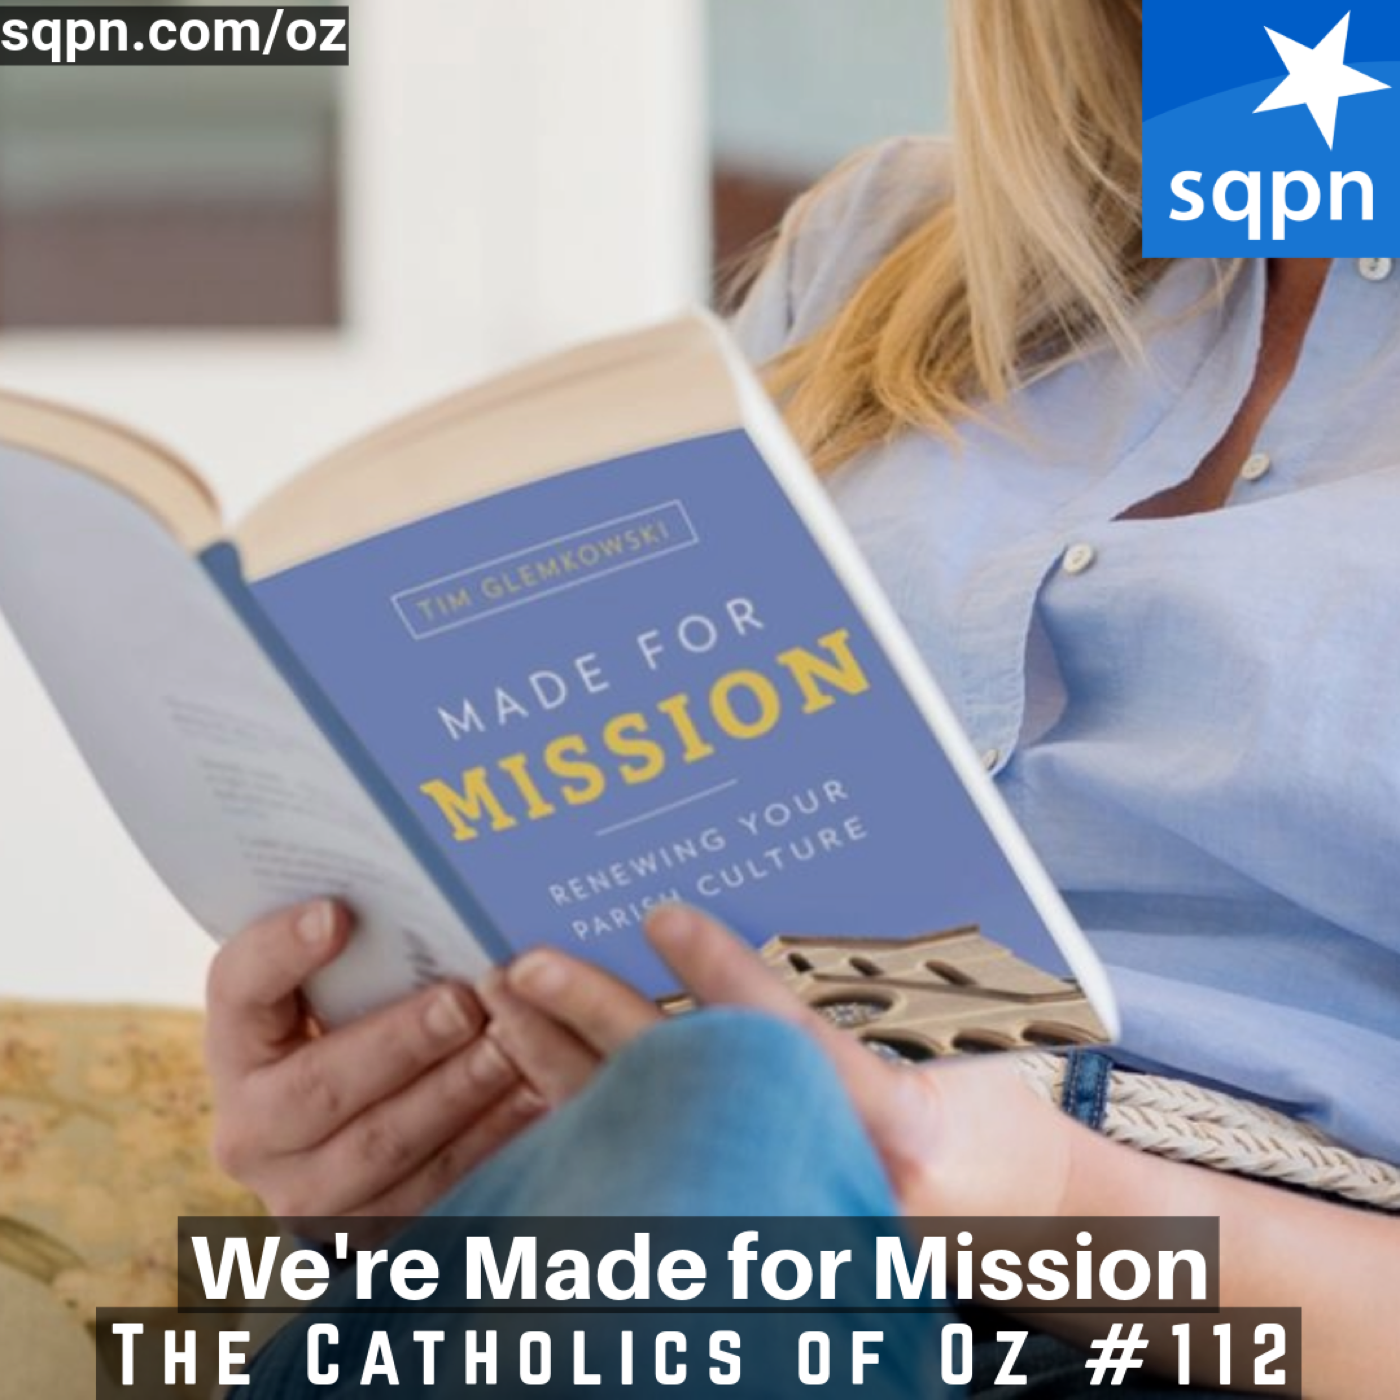 We’re Made For Mission